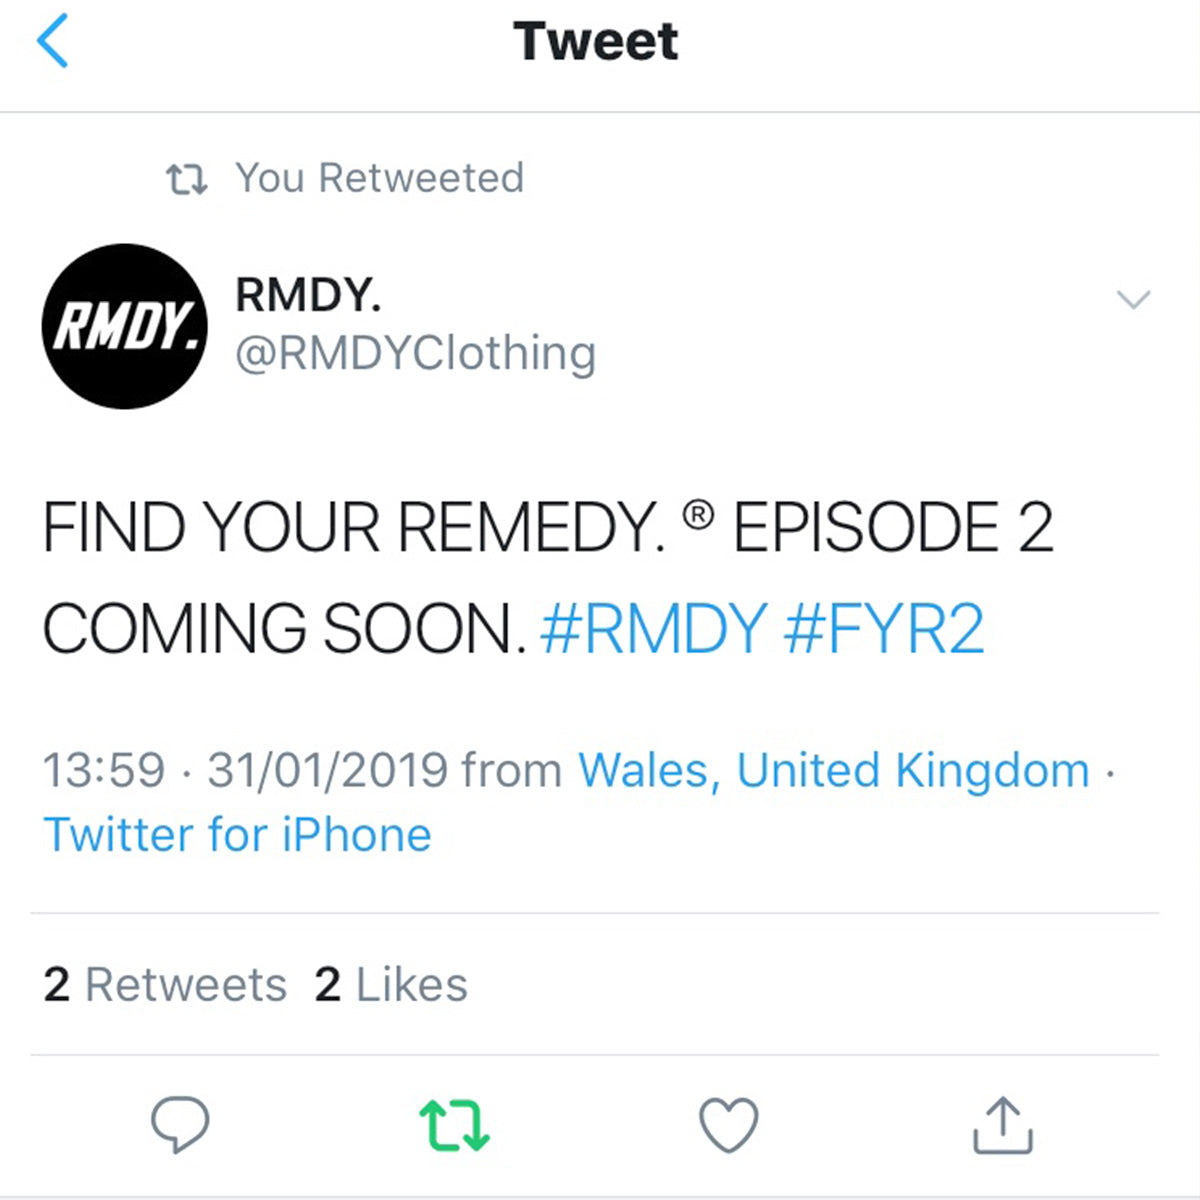 Find Your REMEDY. - Episode 2. COMING SOON